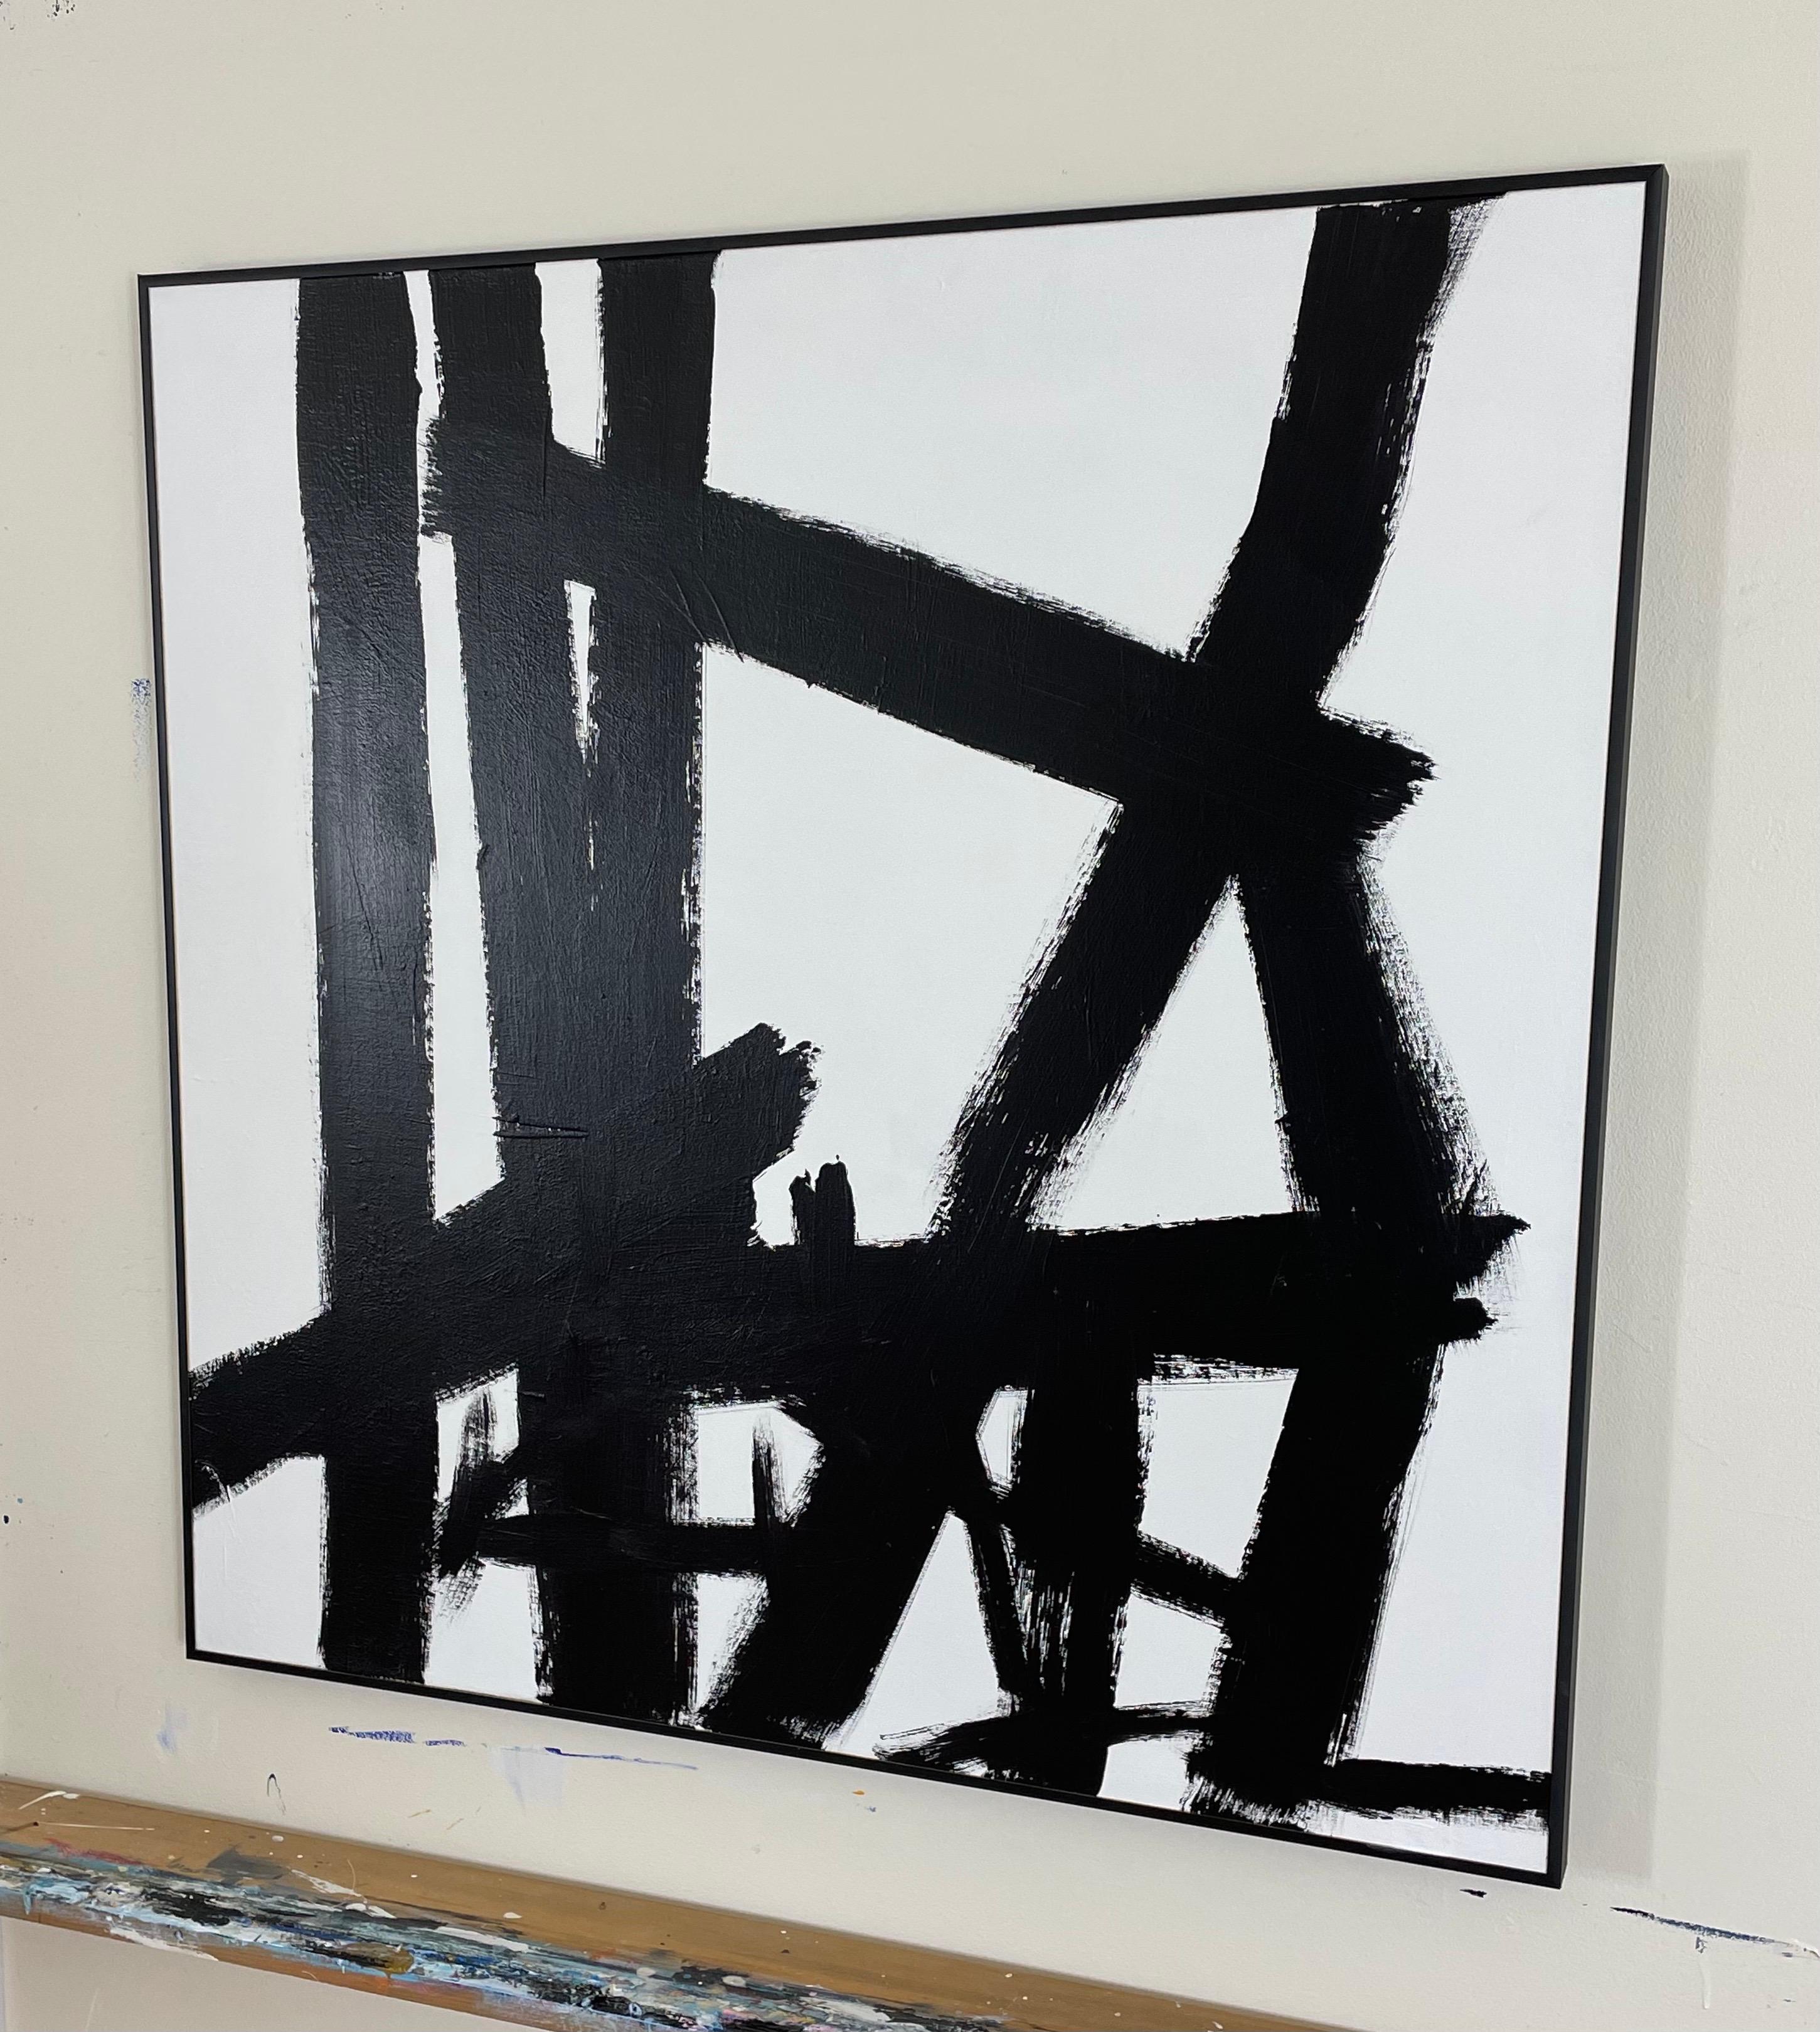 Mid century abstract expressionist painting in the style of Franz Kline, acrylic on canvas, black metal frame. New York City estate find.

Franz Kline (May 23, 1910 – May 13, 1962) was an American painter. He is associated with the Abstract